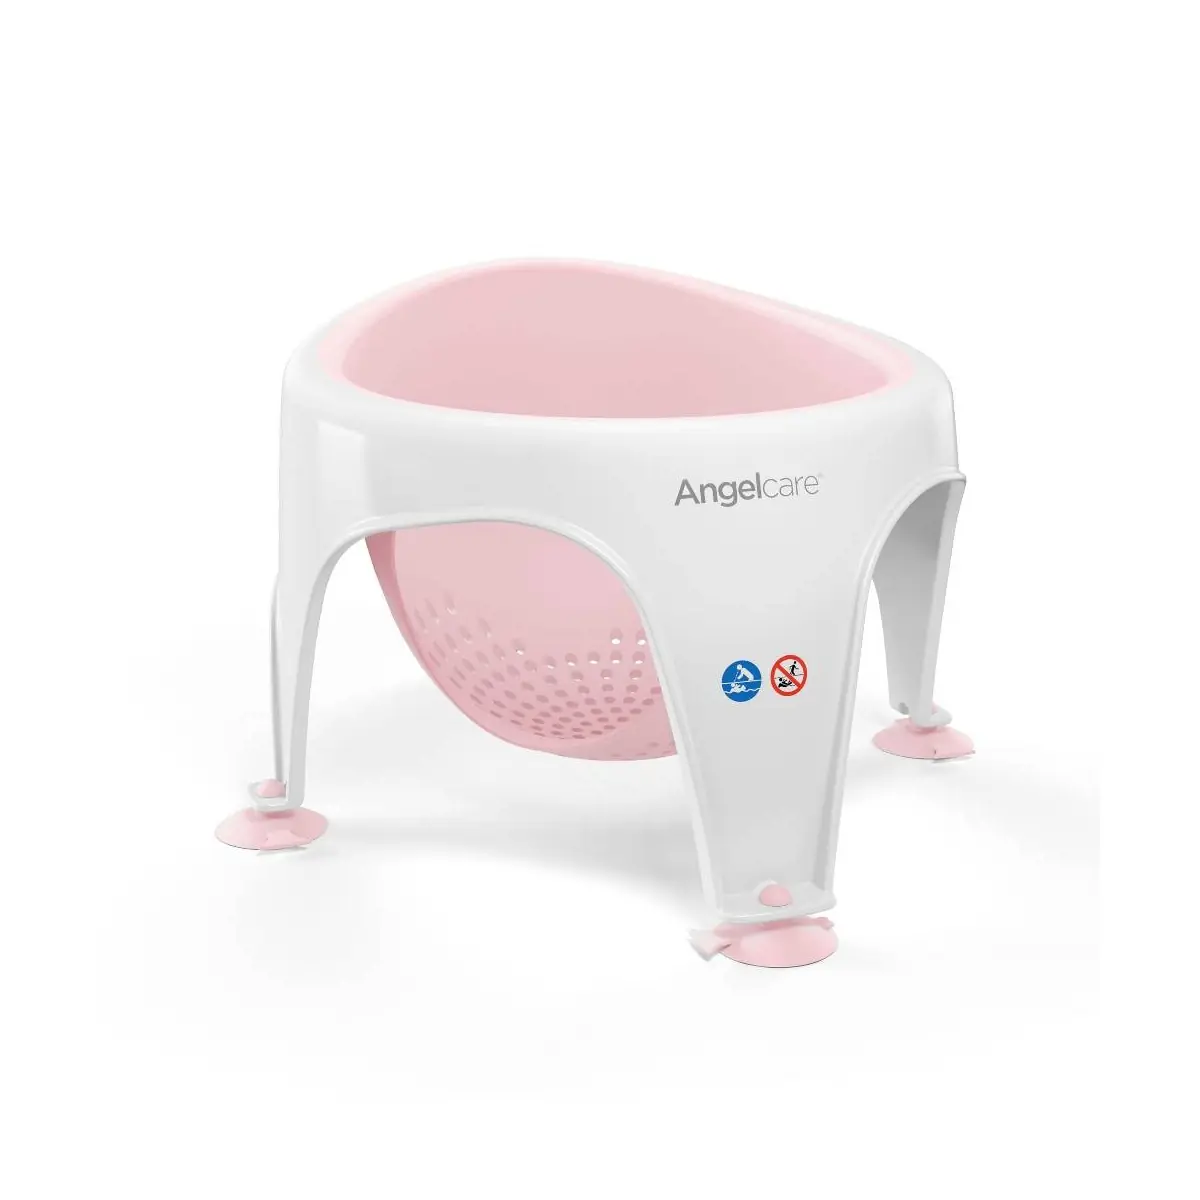 Image of Angelcare Soft Touch Baby Bath Seat-Pink (2021)